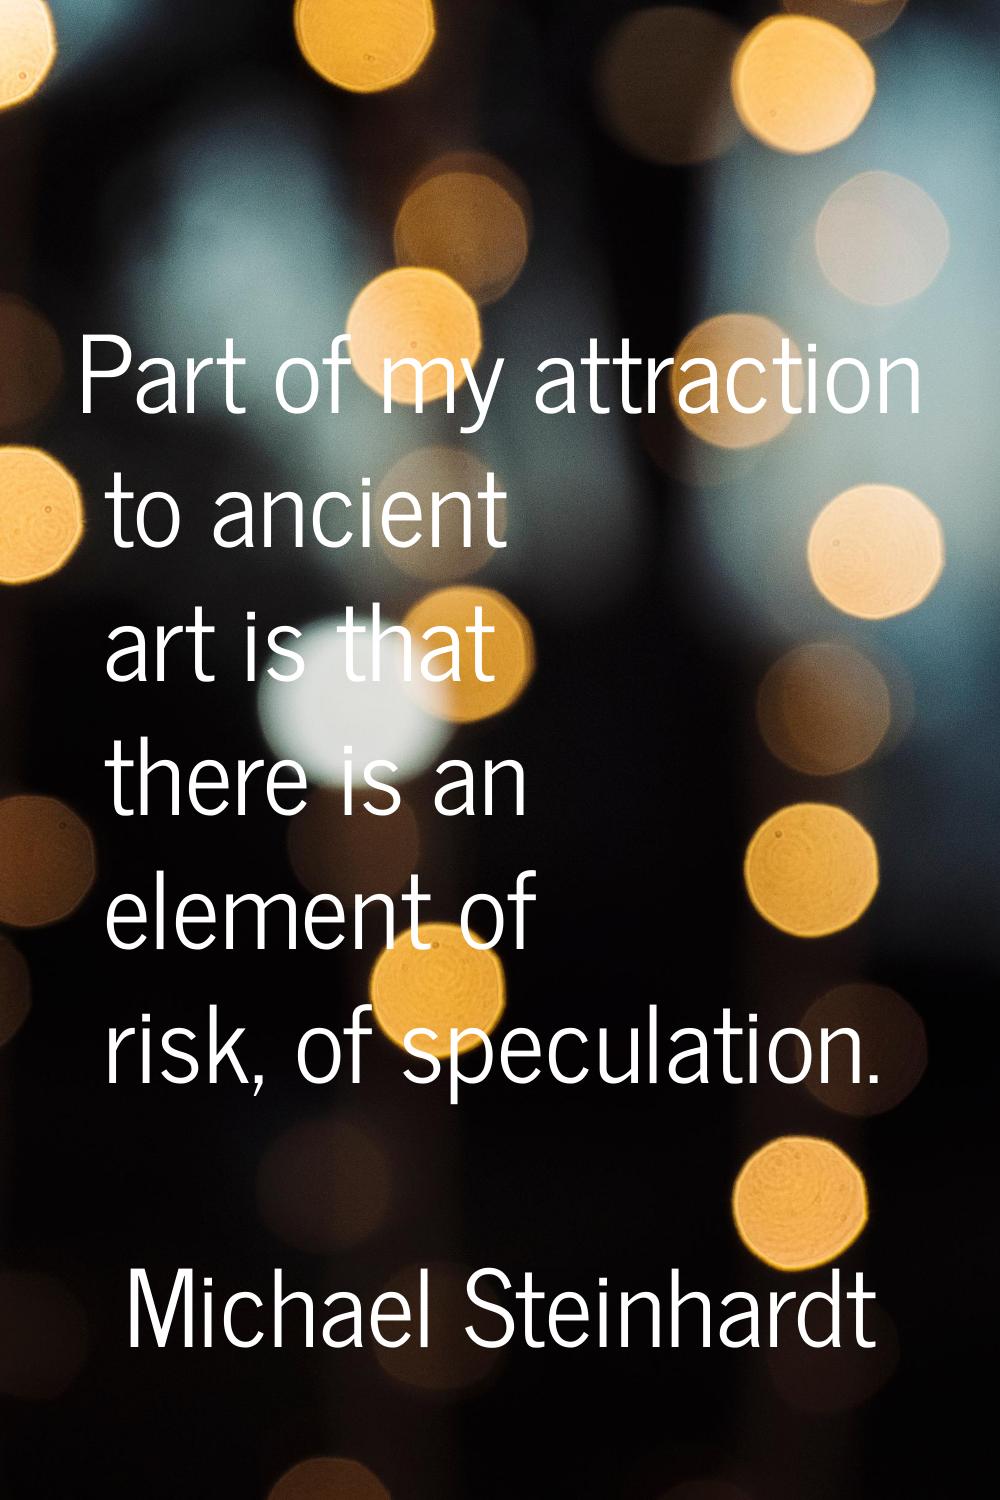 Part of my attraction to ancient art is that there is an element of risk, of speculation.